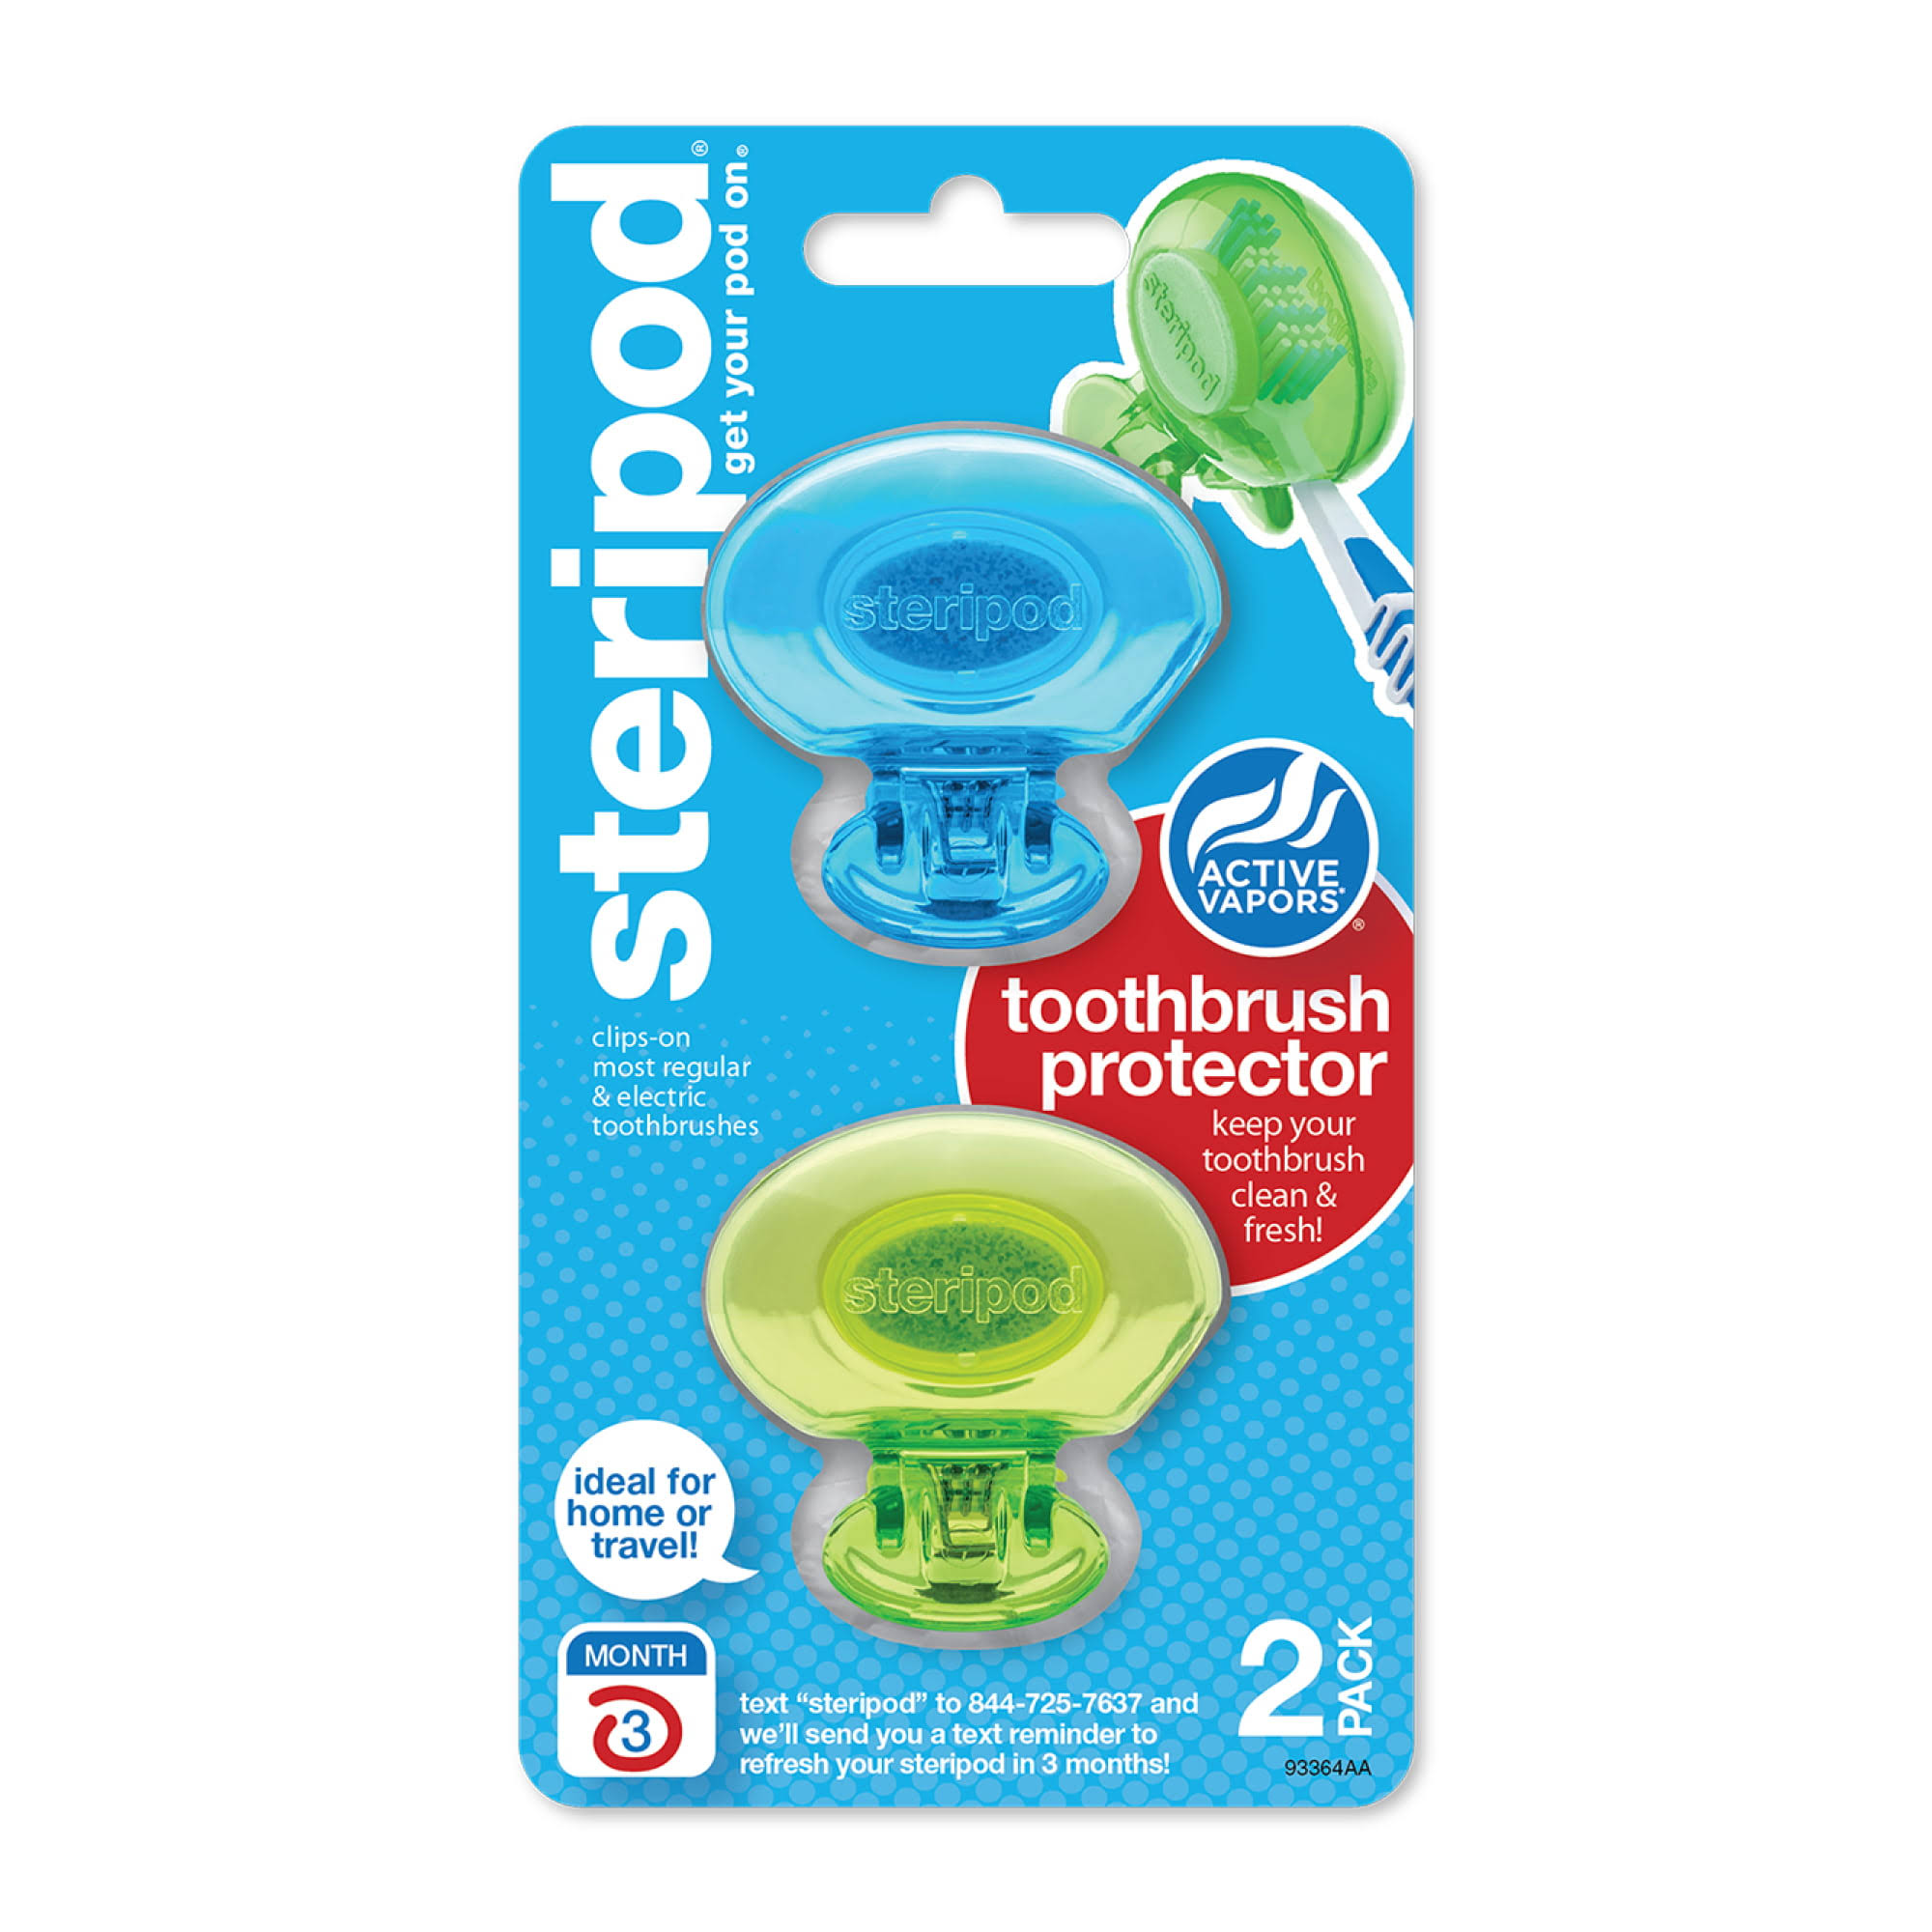 Steripod clip-on toothbrush protector, 2 count (colors may vary)